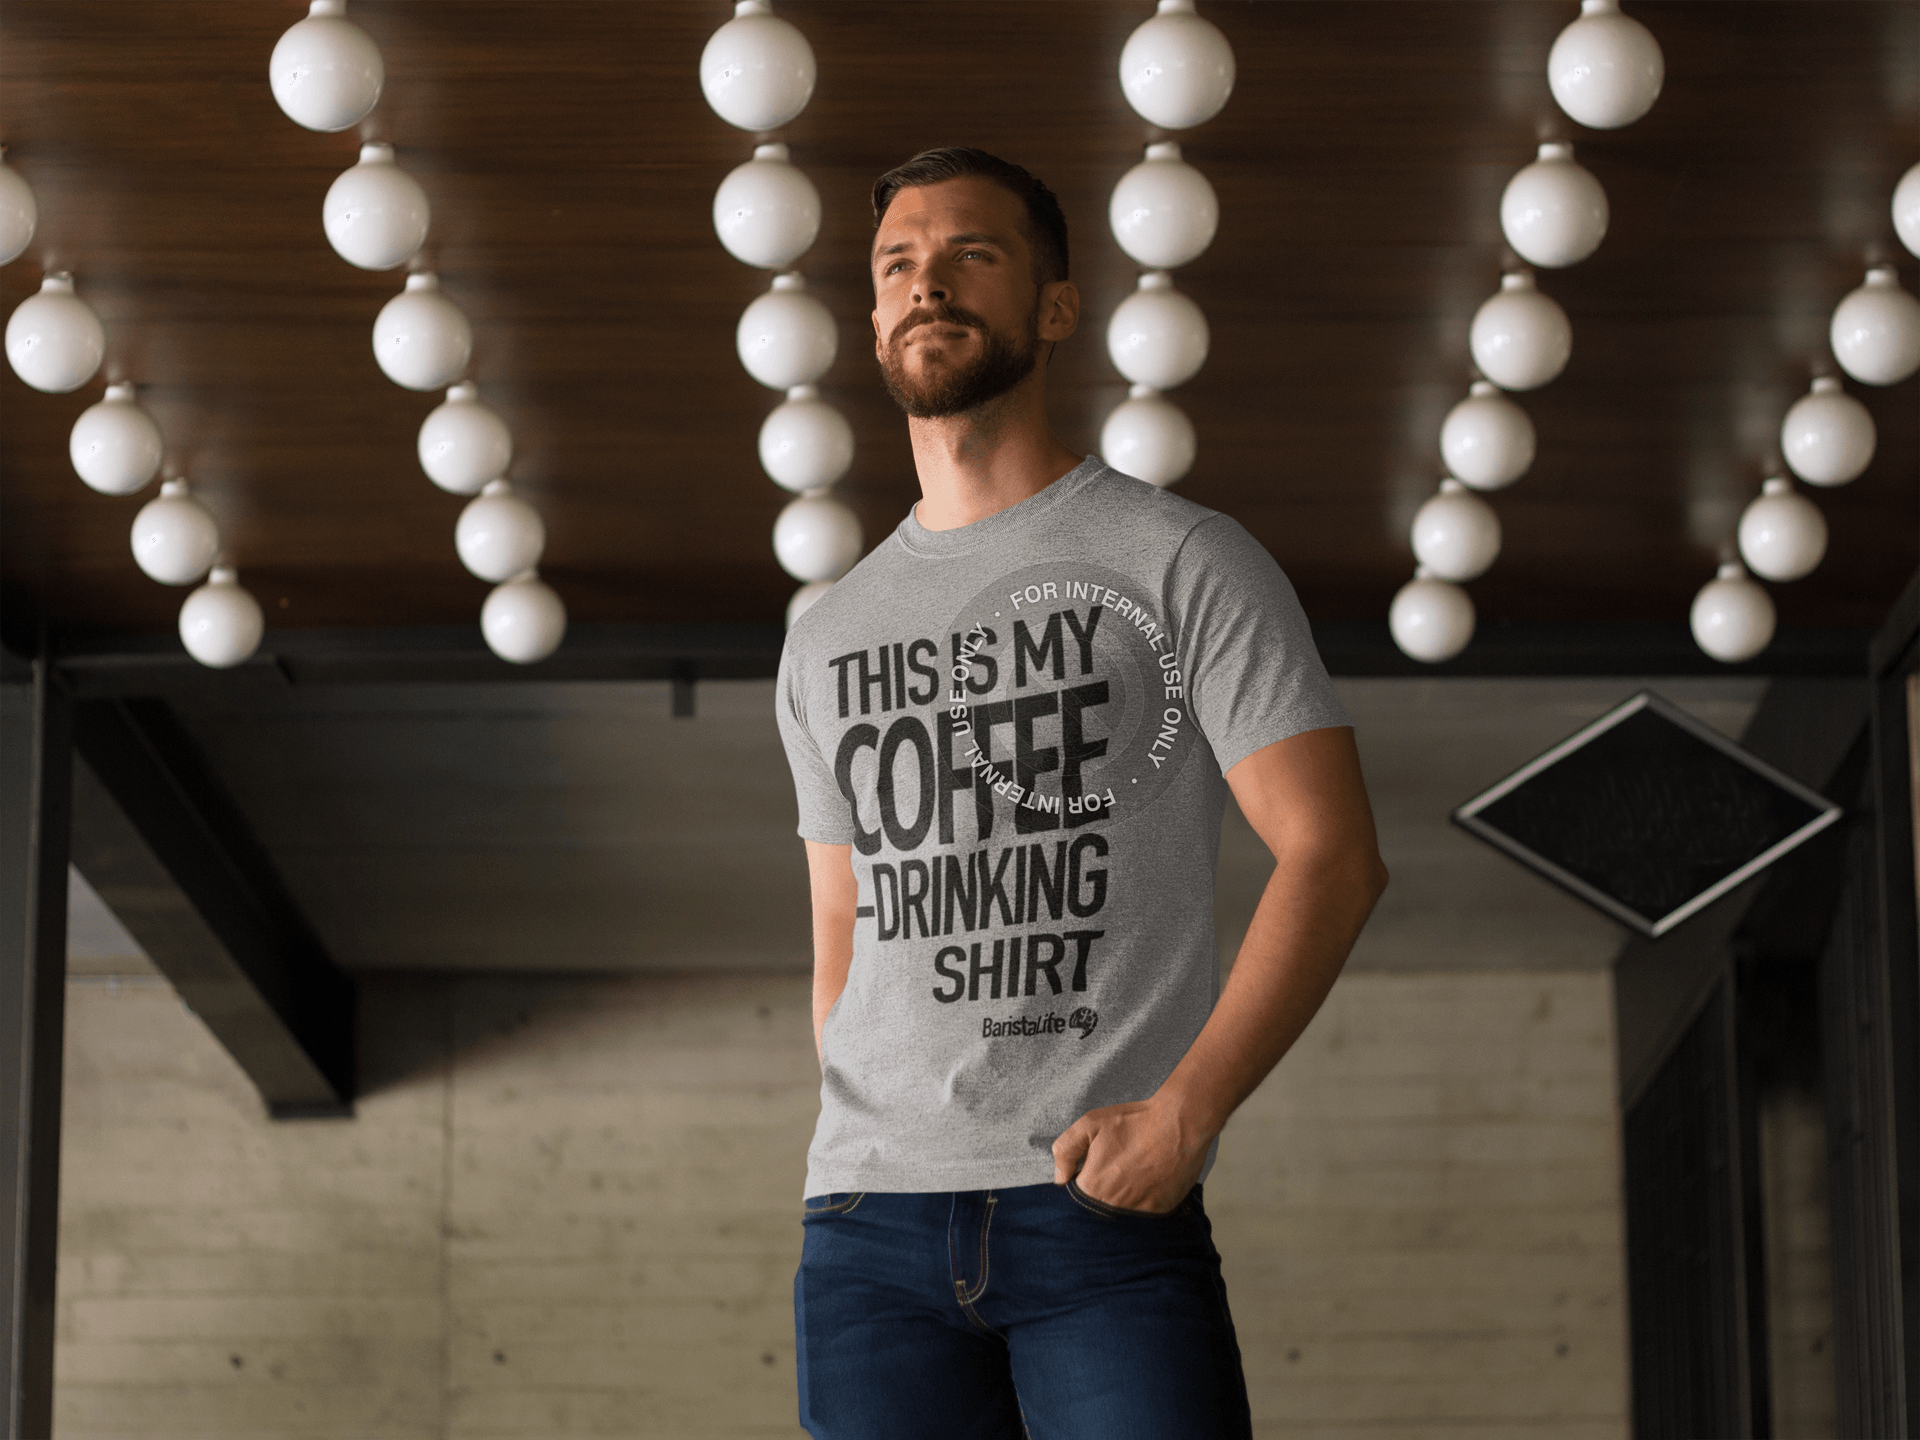 Shirts - 'This Is My Coffee Drinking Shirt' Tee